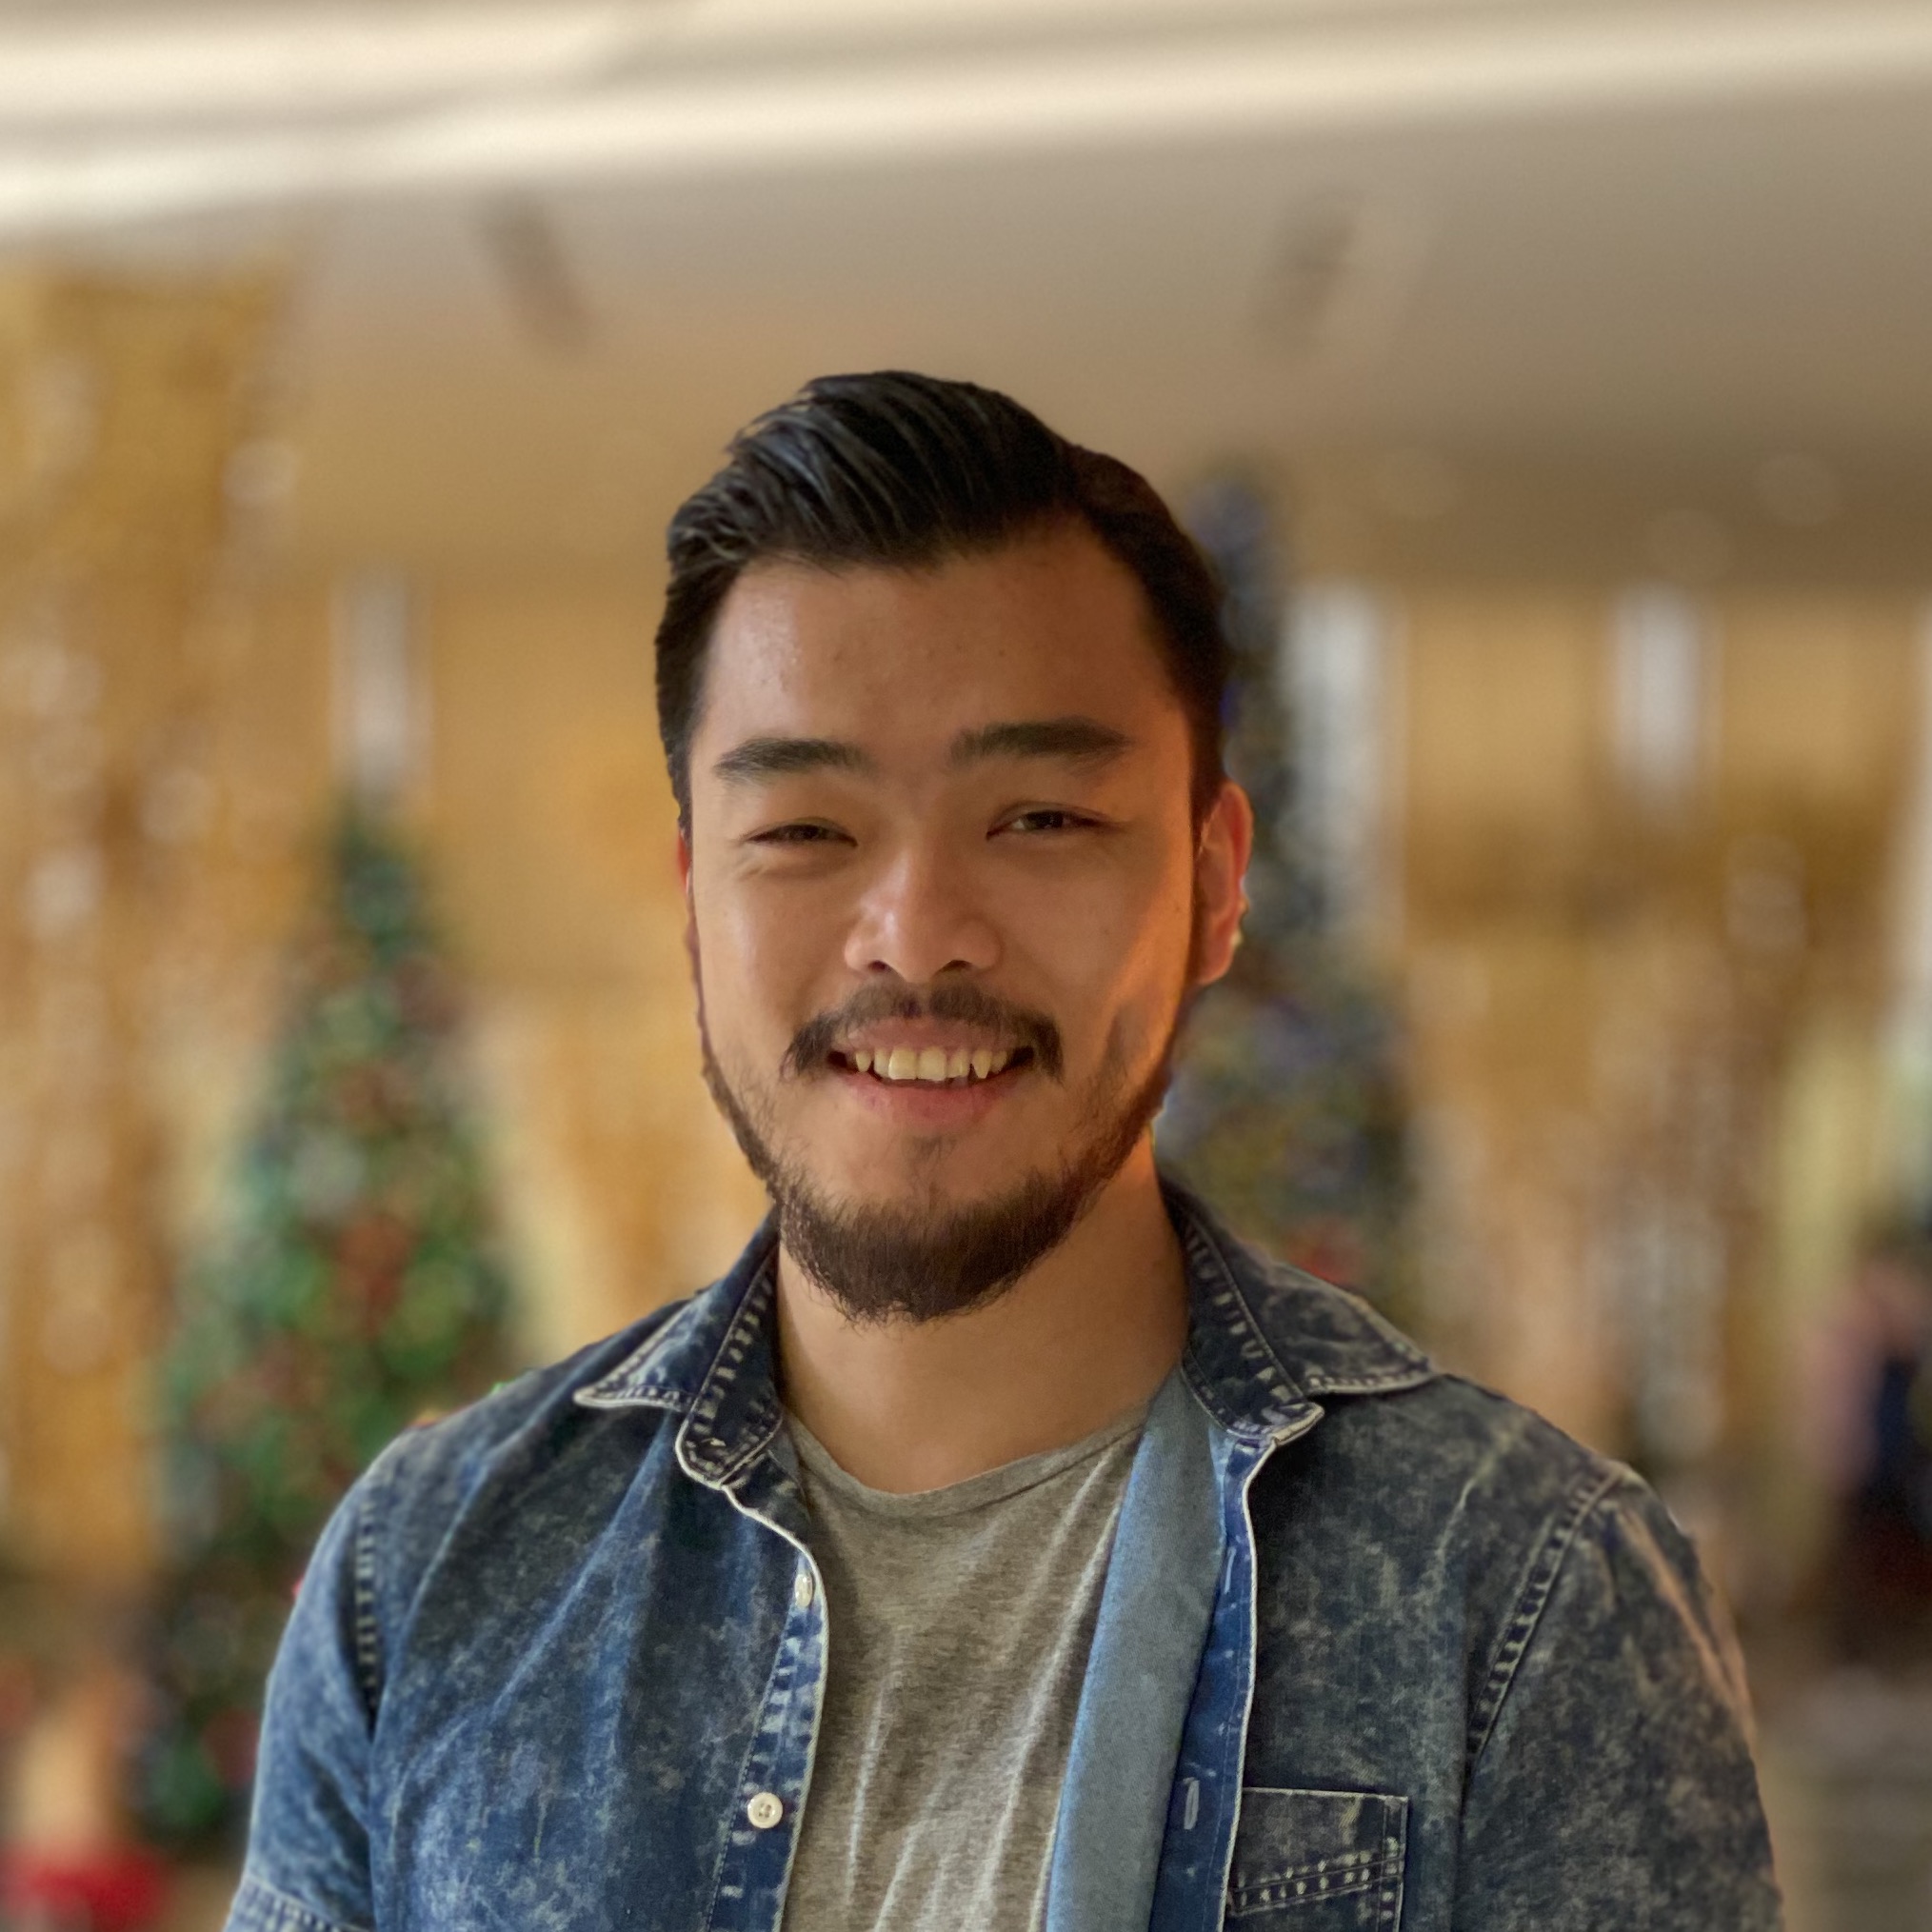 Aaron Chu, an east asian man with a beard and mustache smiling into the camera in front of a blurred background with golden architectural elements and christmas trees. He is wearing a grey t-shirt and a denim shirt.